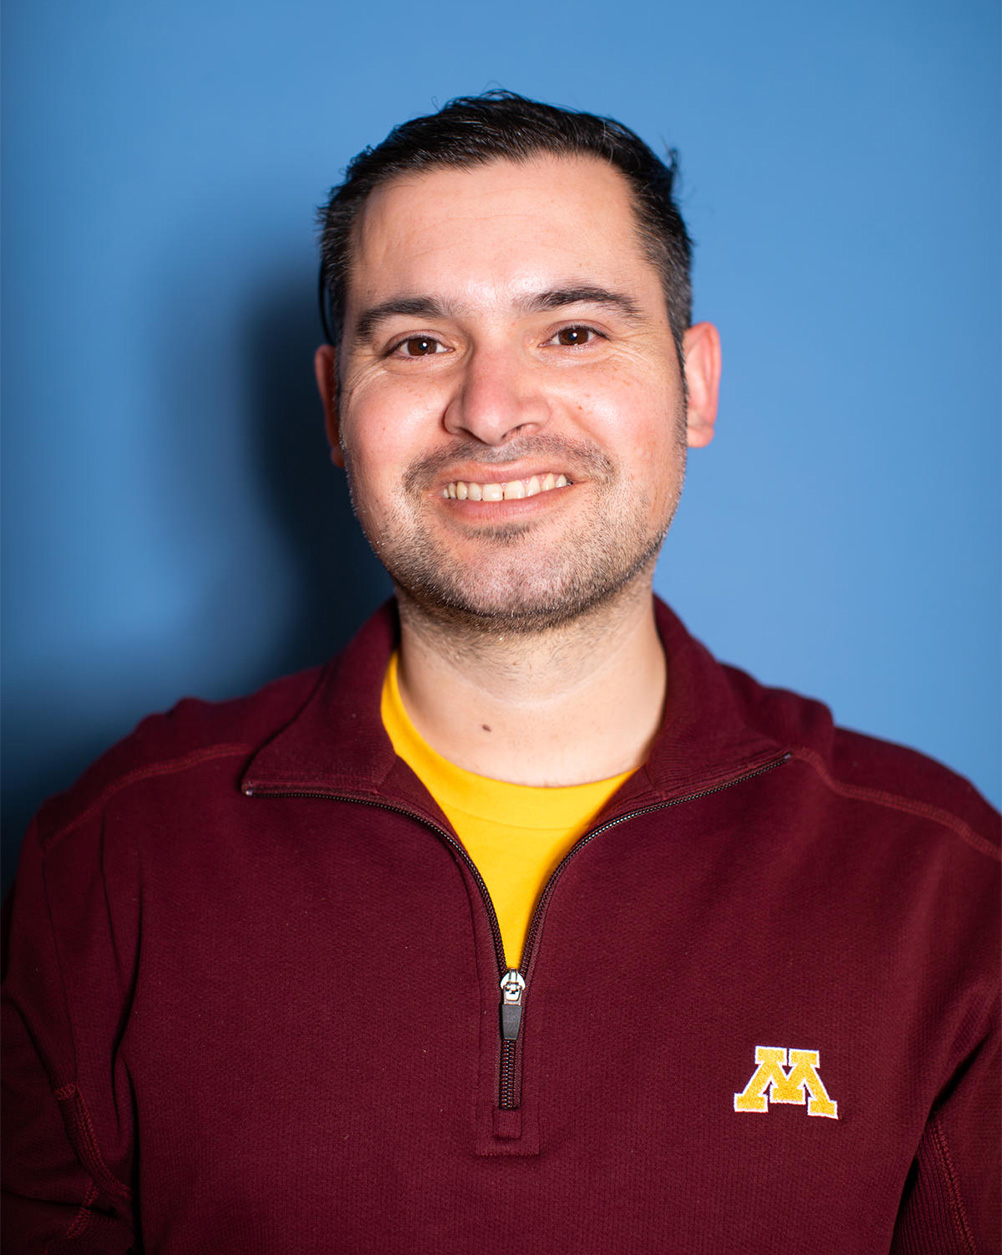 Headshot of Daniel Morales. He is standing in front of a blue background wearing a maroon U of M sweater and smiling directly at the camera.